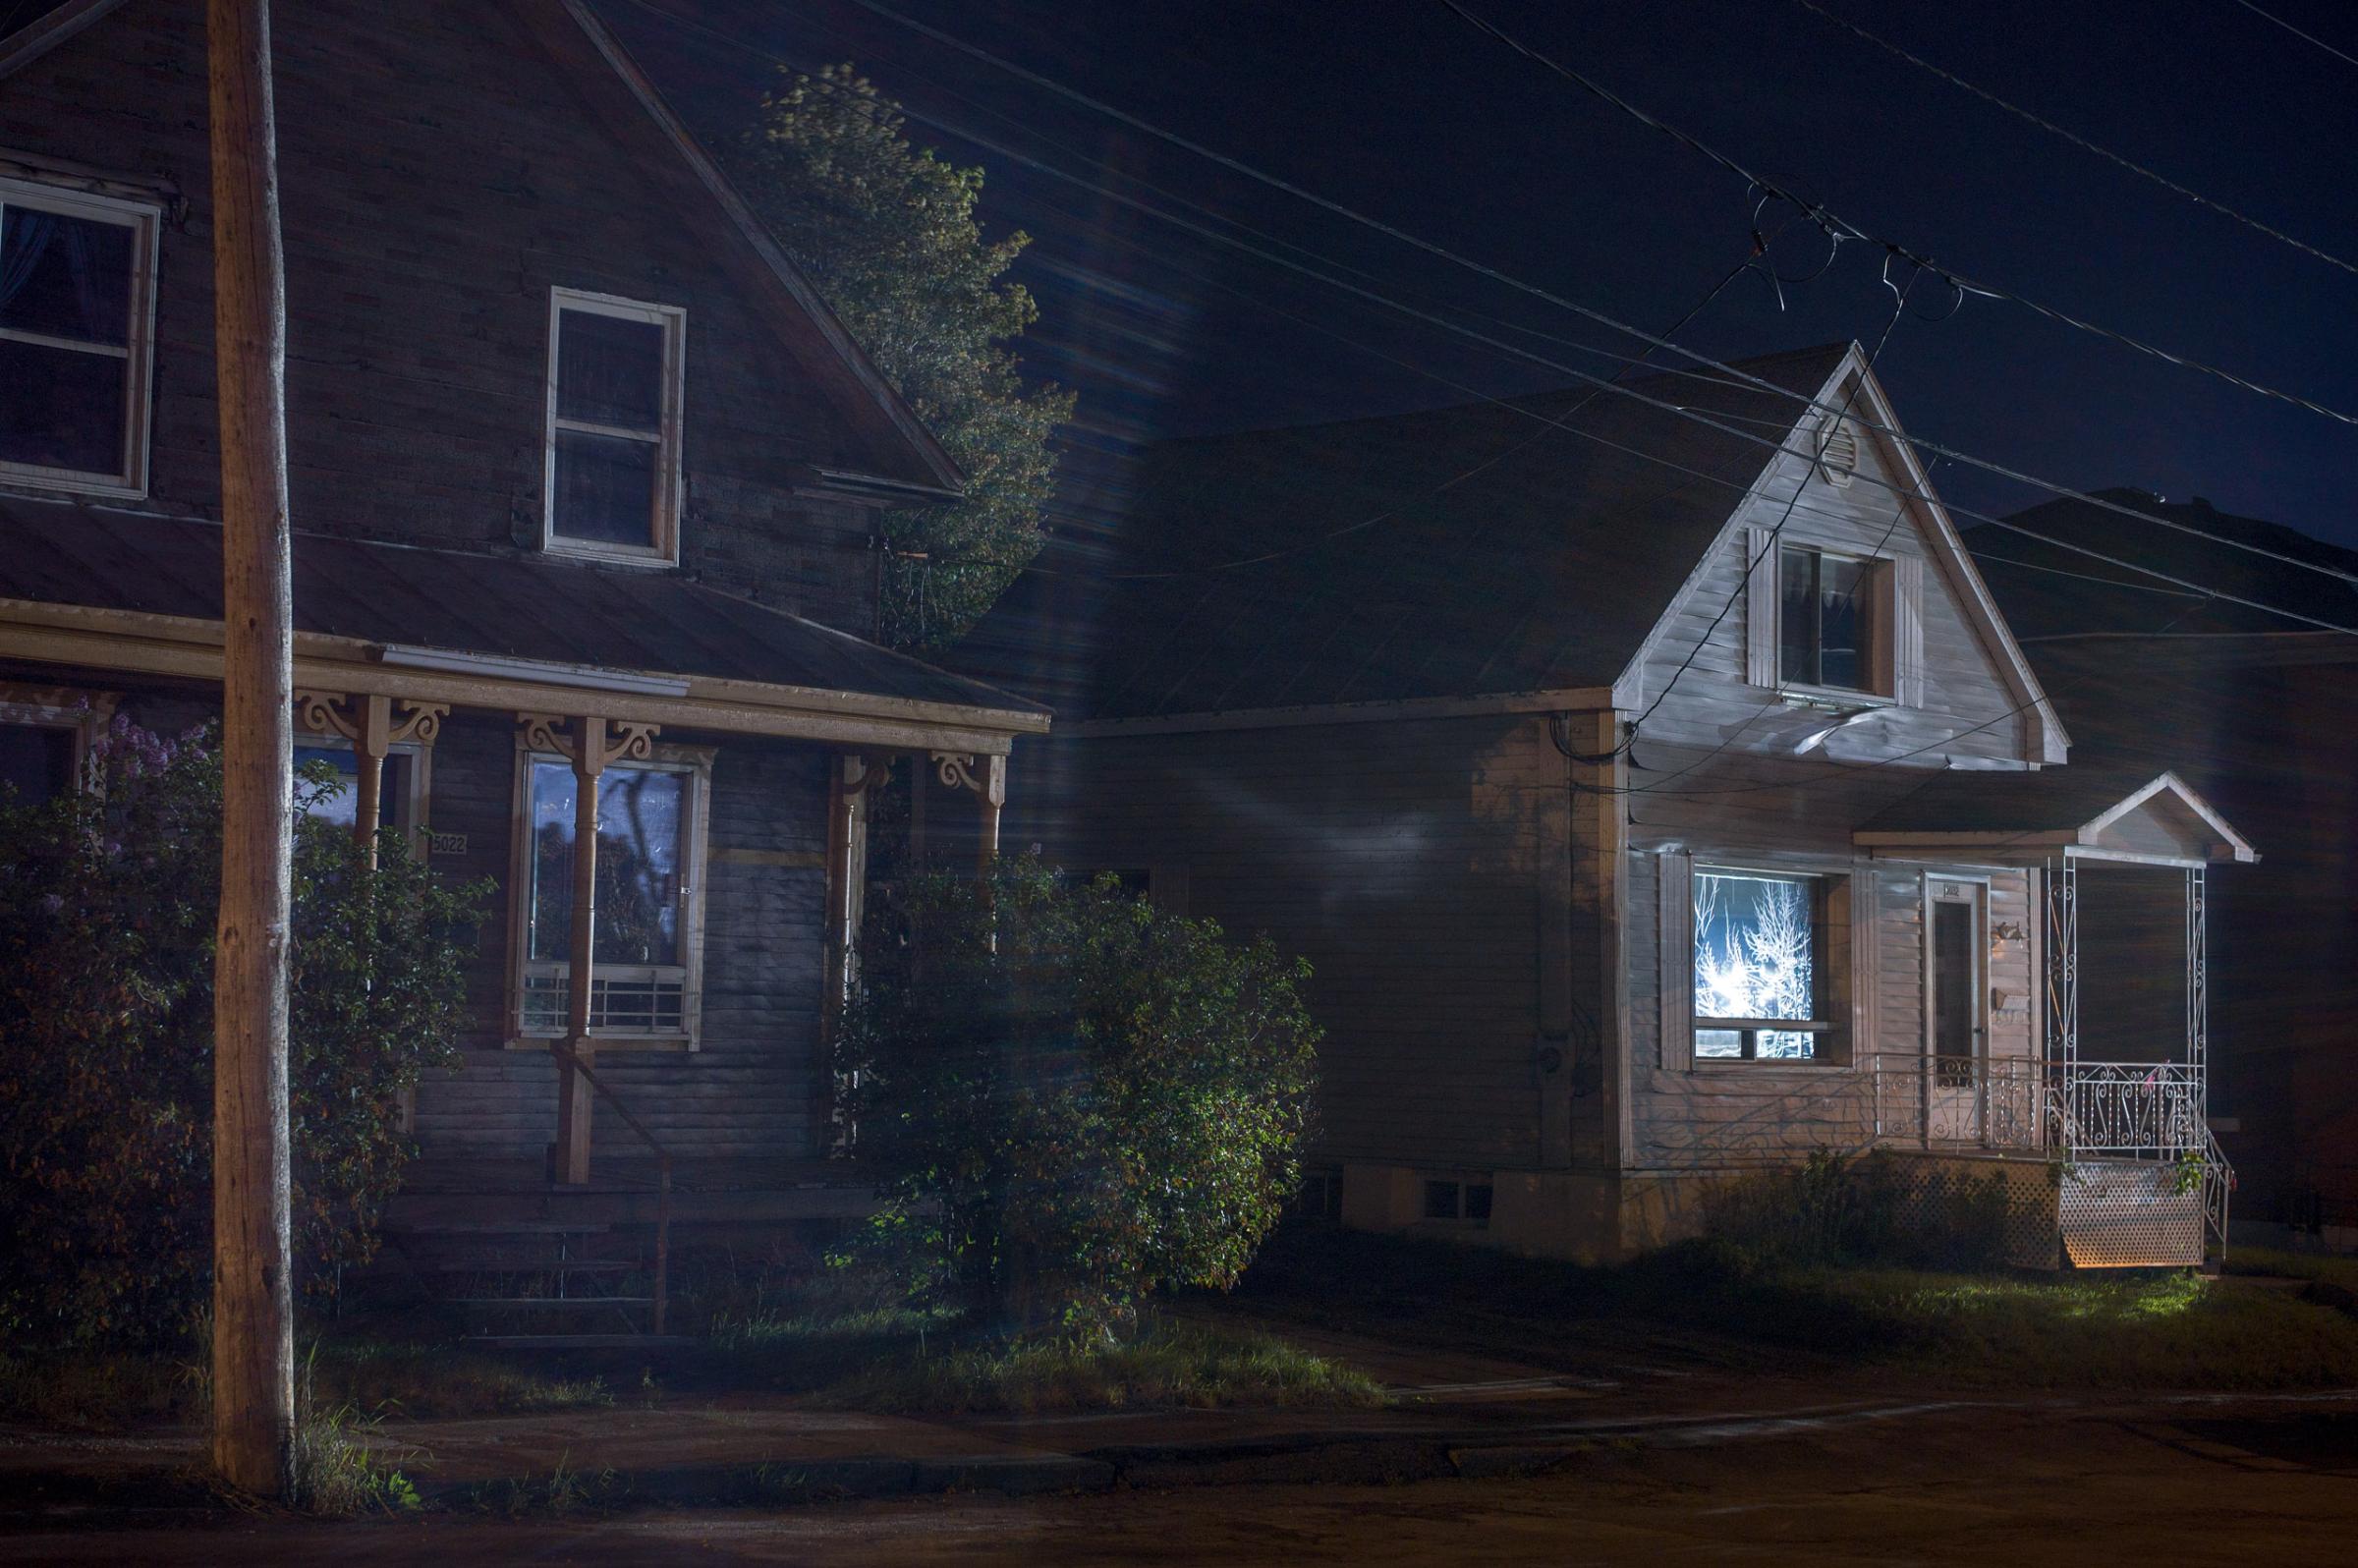 Houses lit by spotlights from the Red Zone, August 2013. From "Post MÈgantic" by Michel Huneault, winner of the 2015 Lange-Taylor Prize.